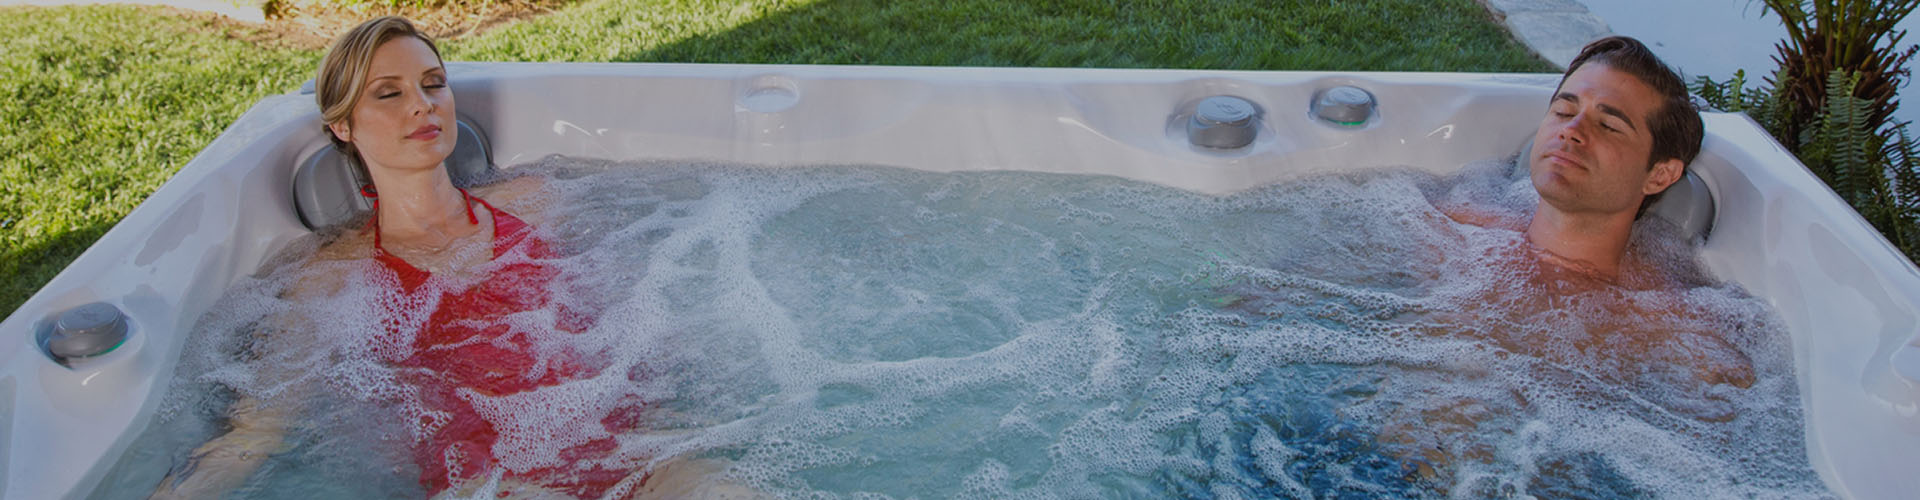 Hot Tub Pricing Guide in Tucson, AZ